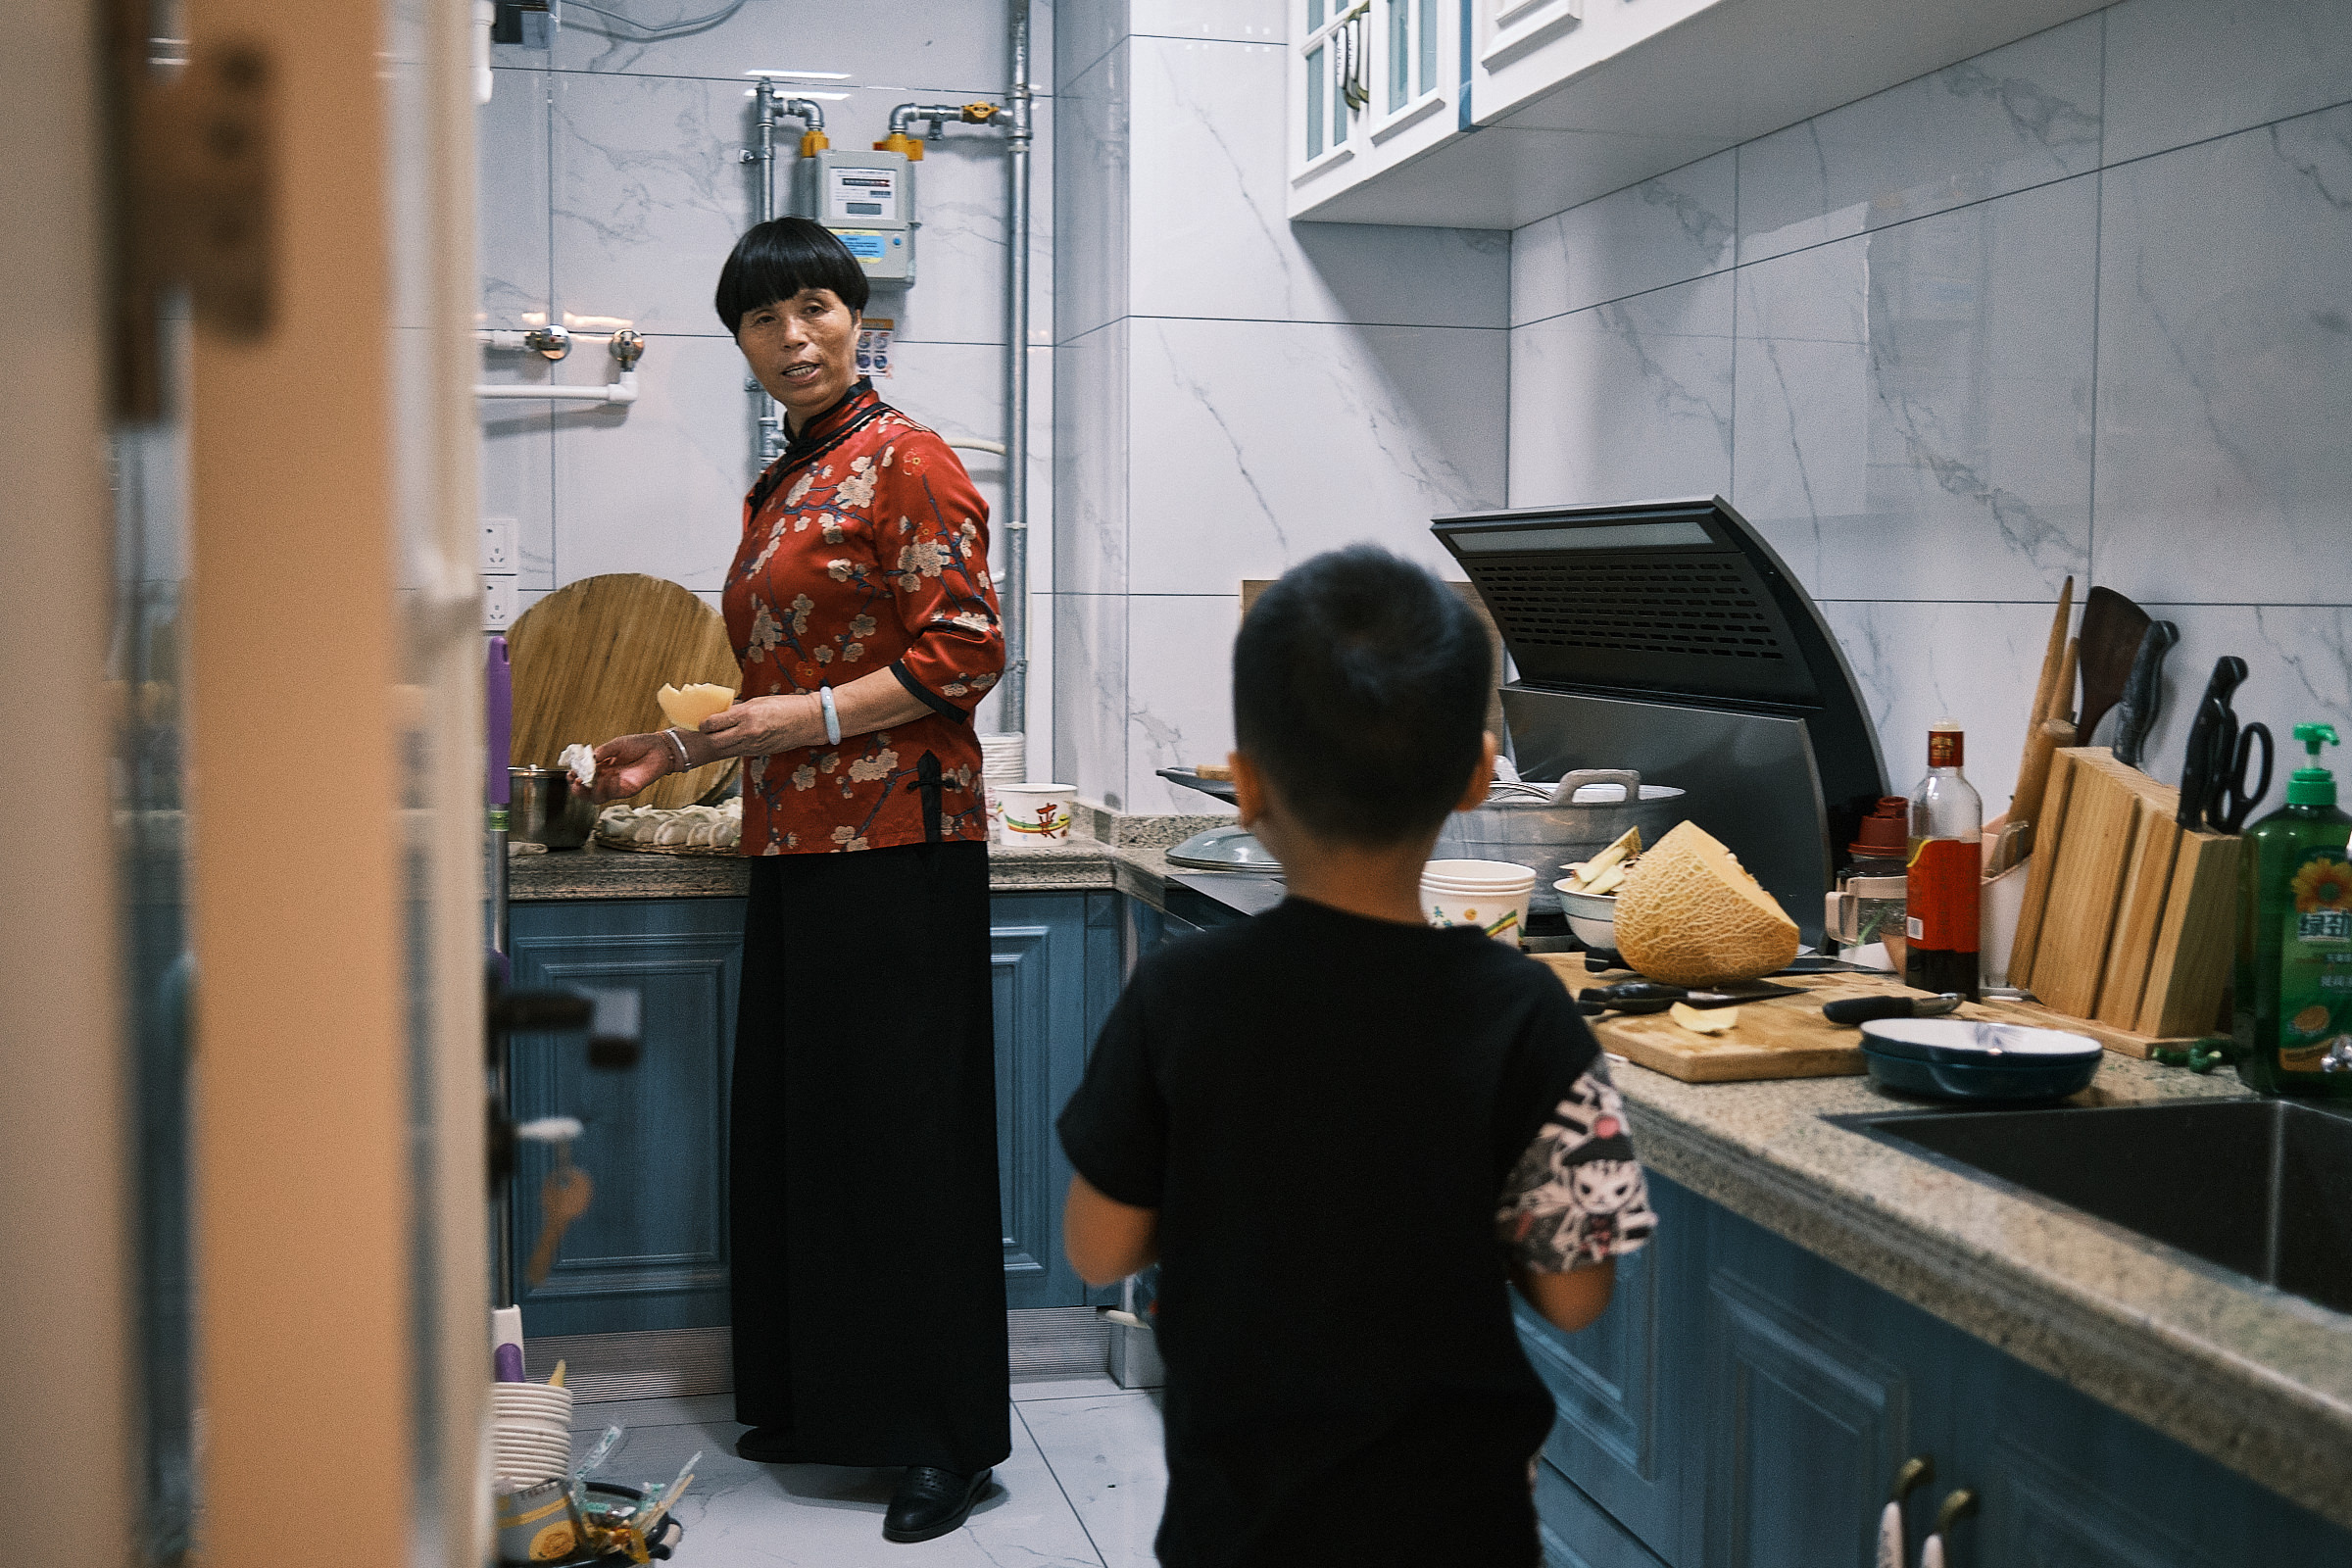 Boy In Kitchen Looks At Aunt As She Finishes Preparing Dumplings